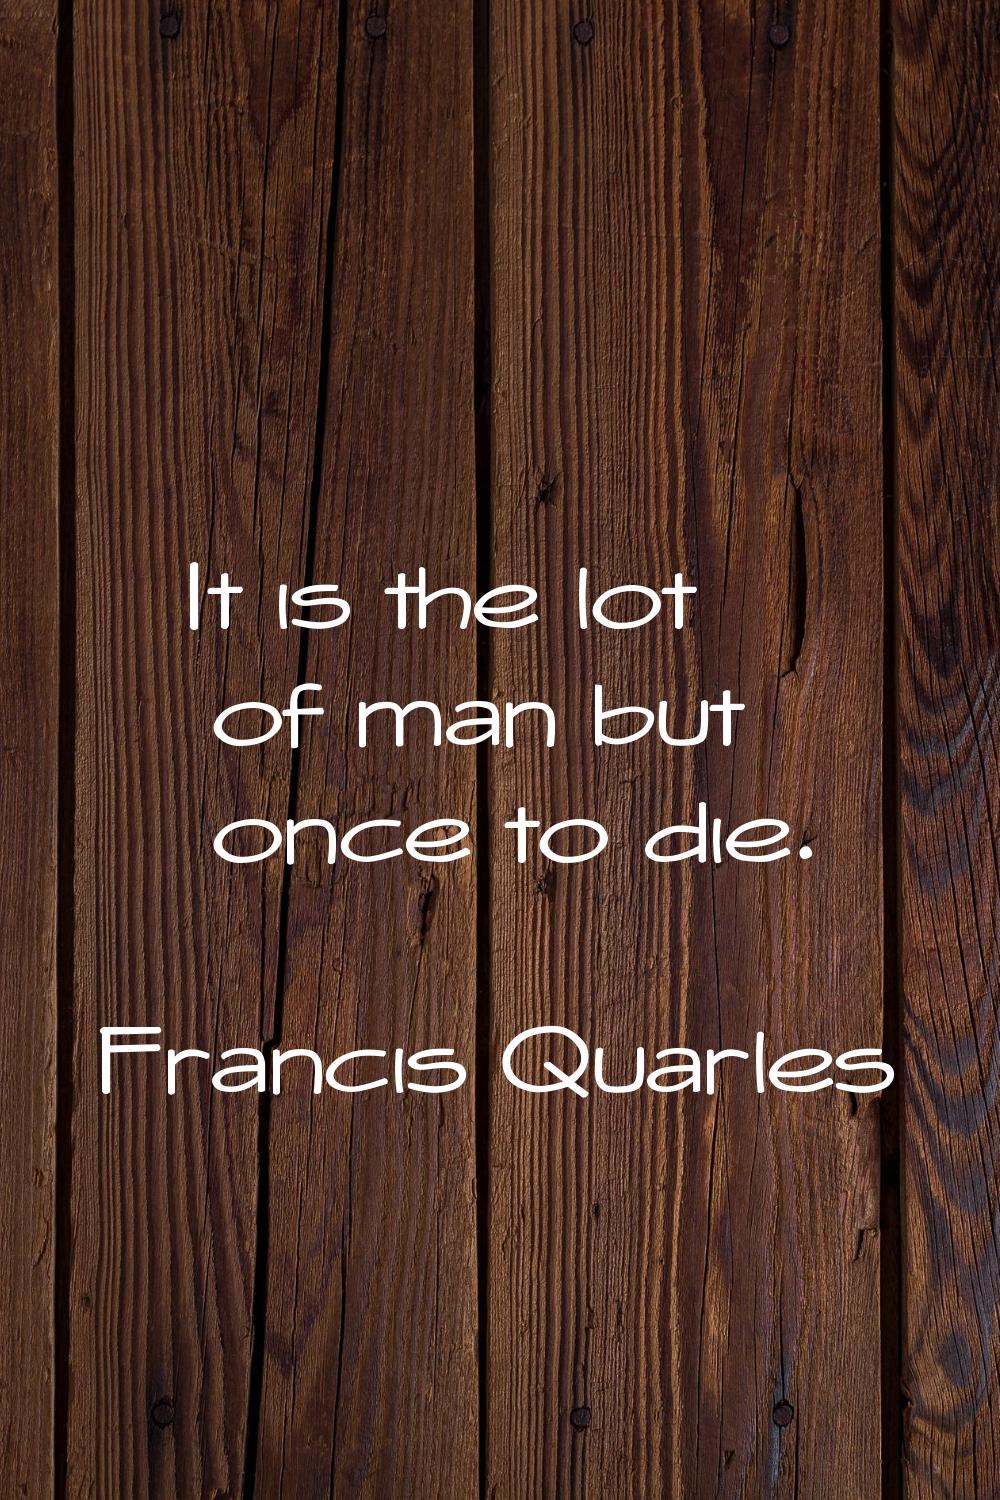 It is the lot of man but once to die.